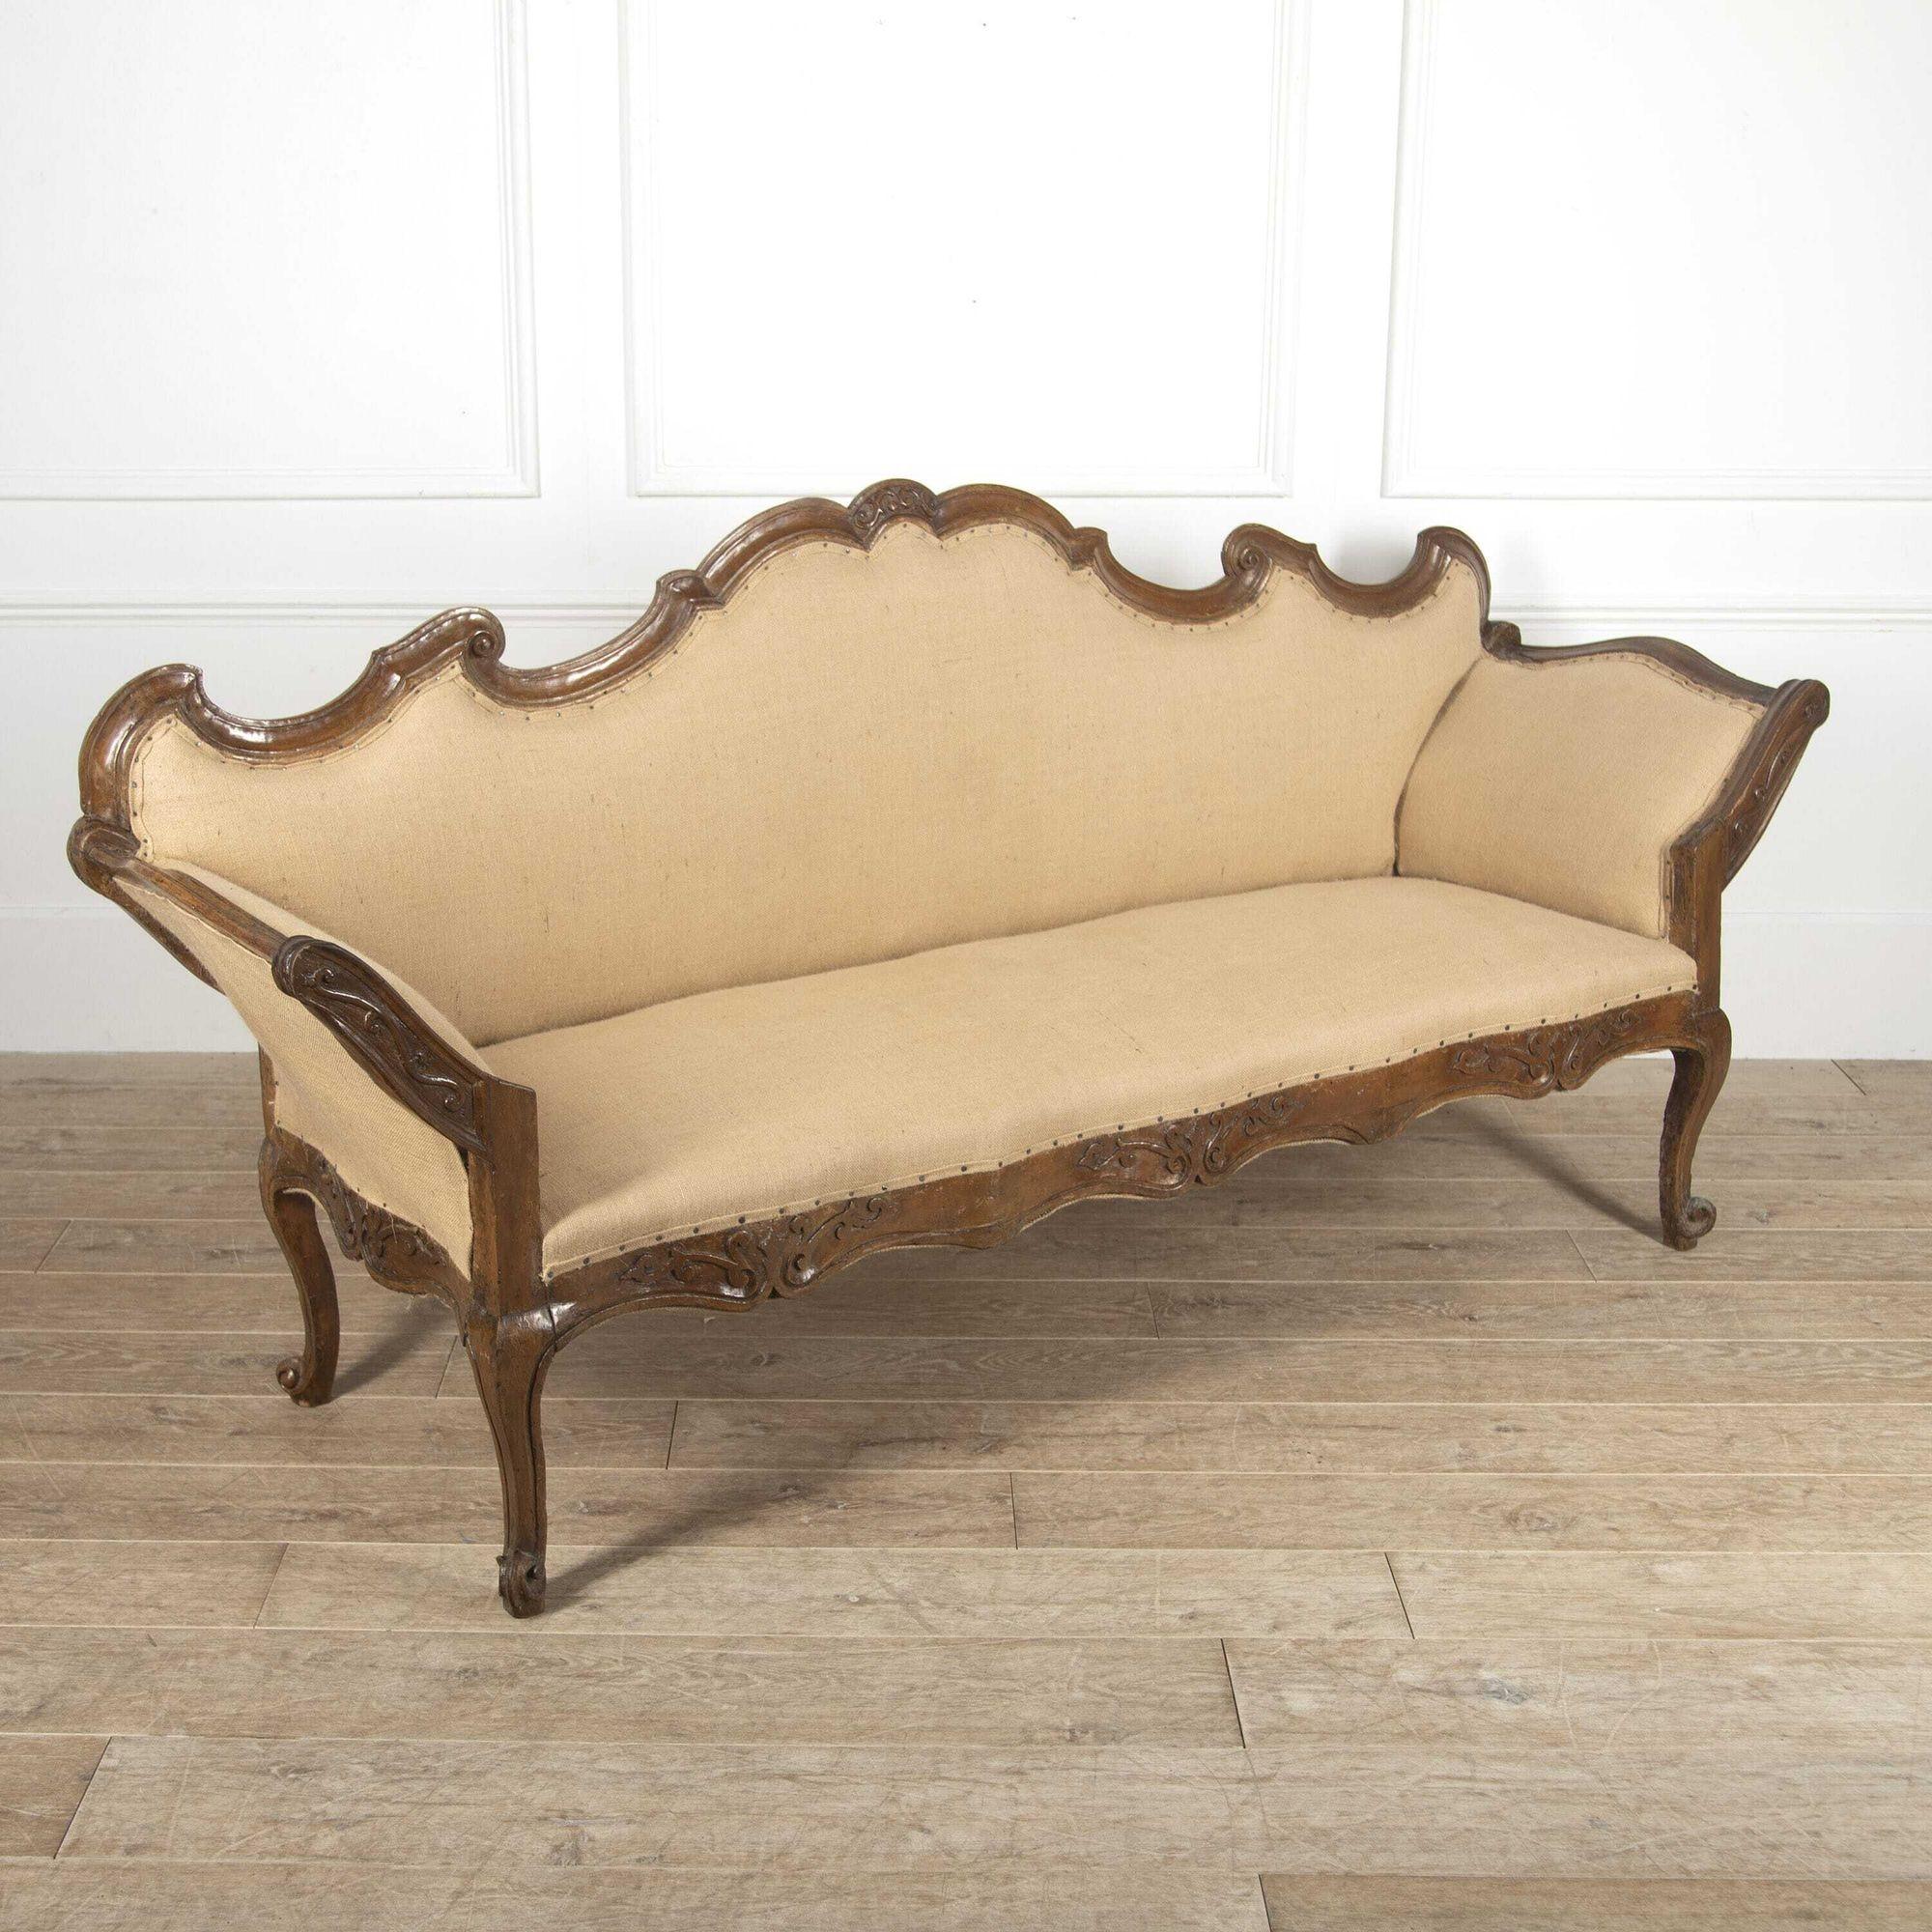 Wonderful northern Italian 18th century walnut sofa. 
This sofa has a fantastic intricately hand-carved frame in the romantic rococo style. With outswept arms and raised on cabriole legs. 
This sofa has been restored and reupholstered in hessian.